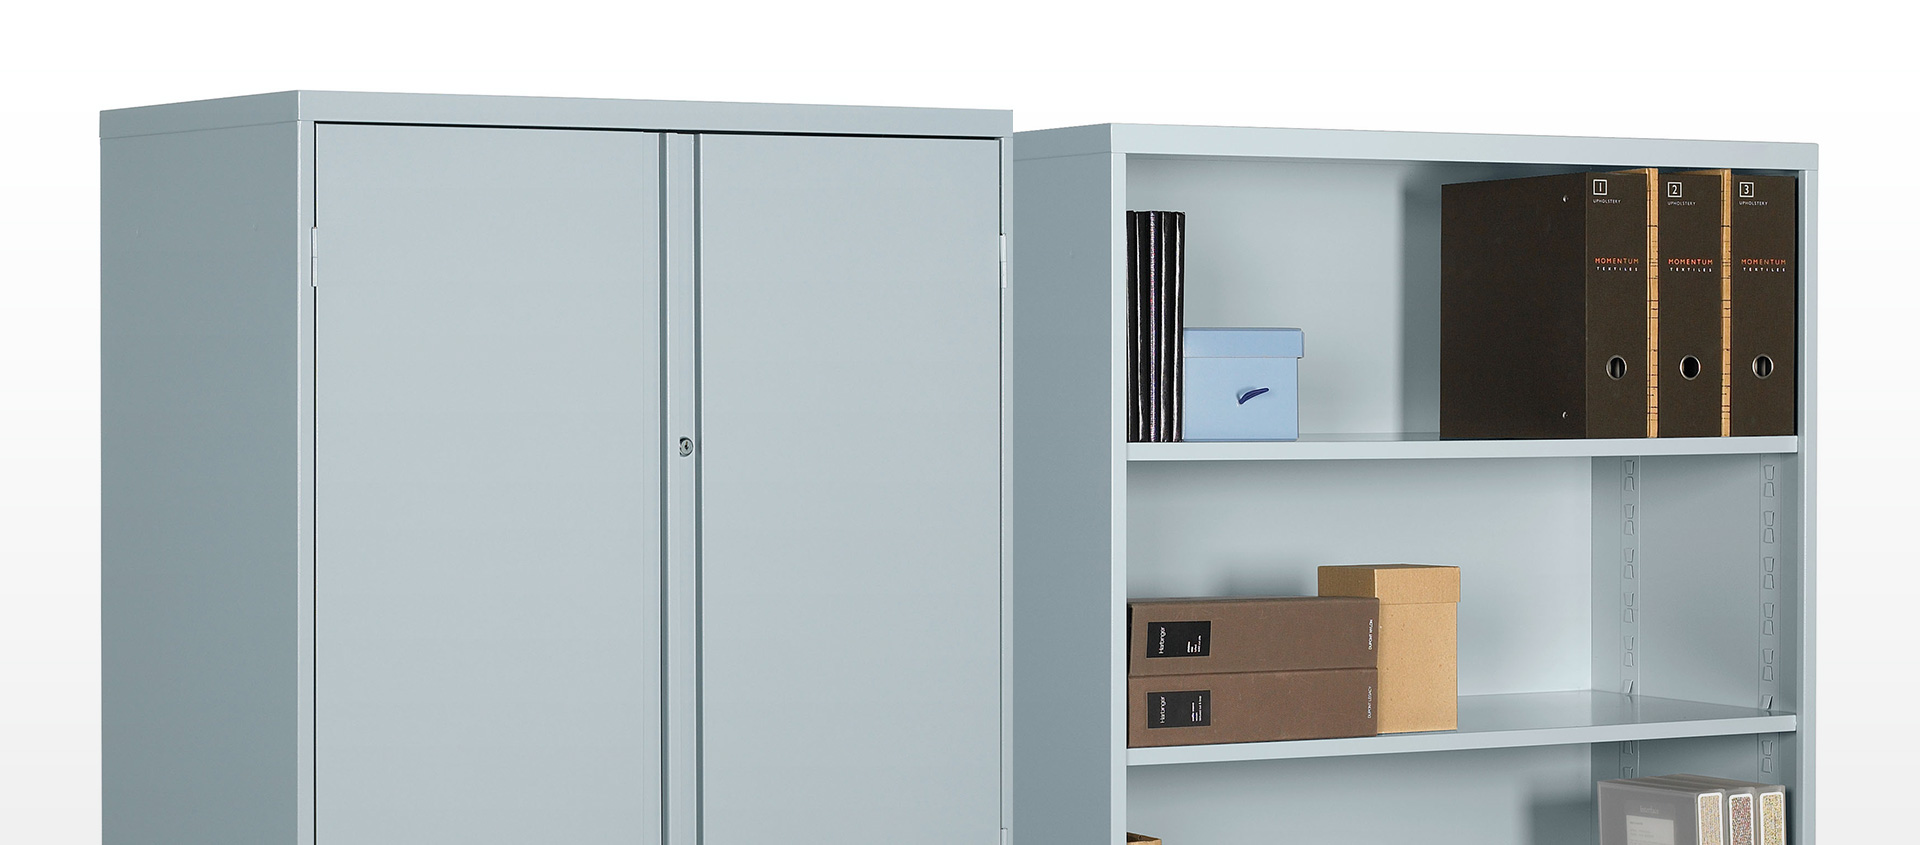 Image of metal office storage cabinets